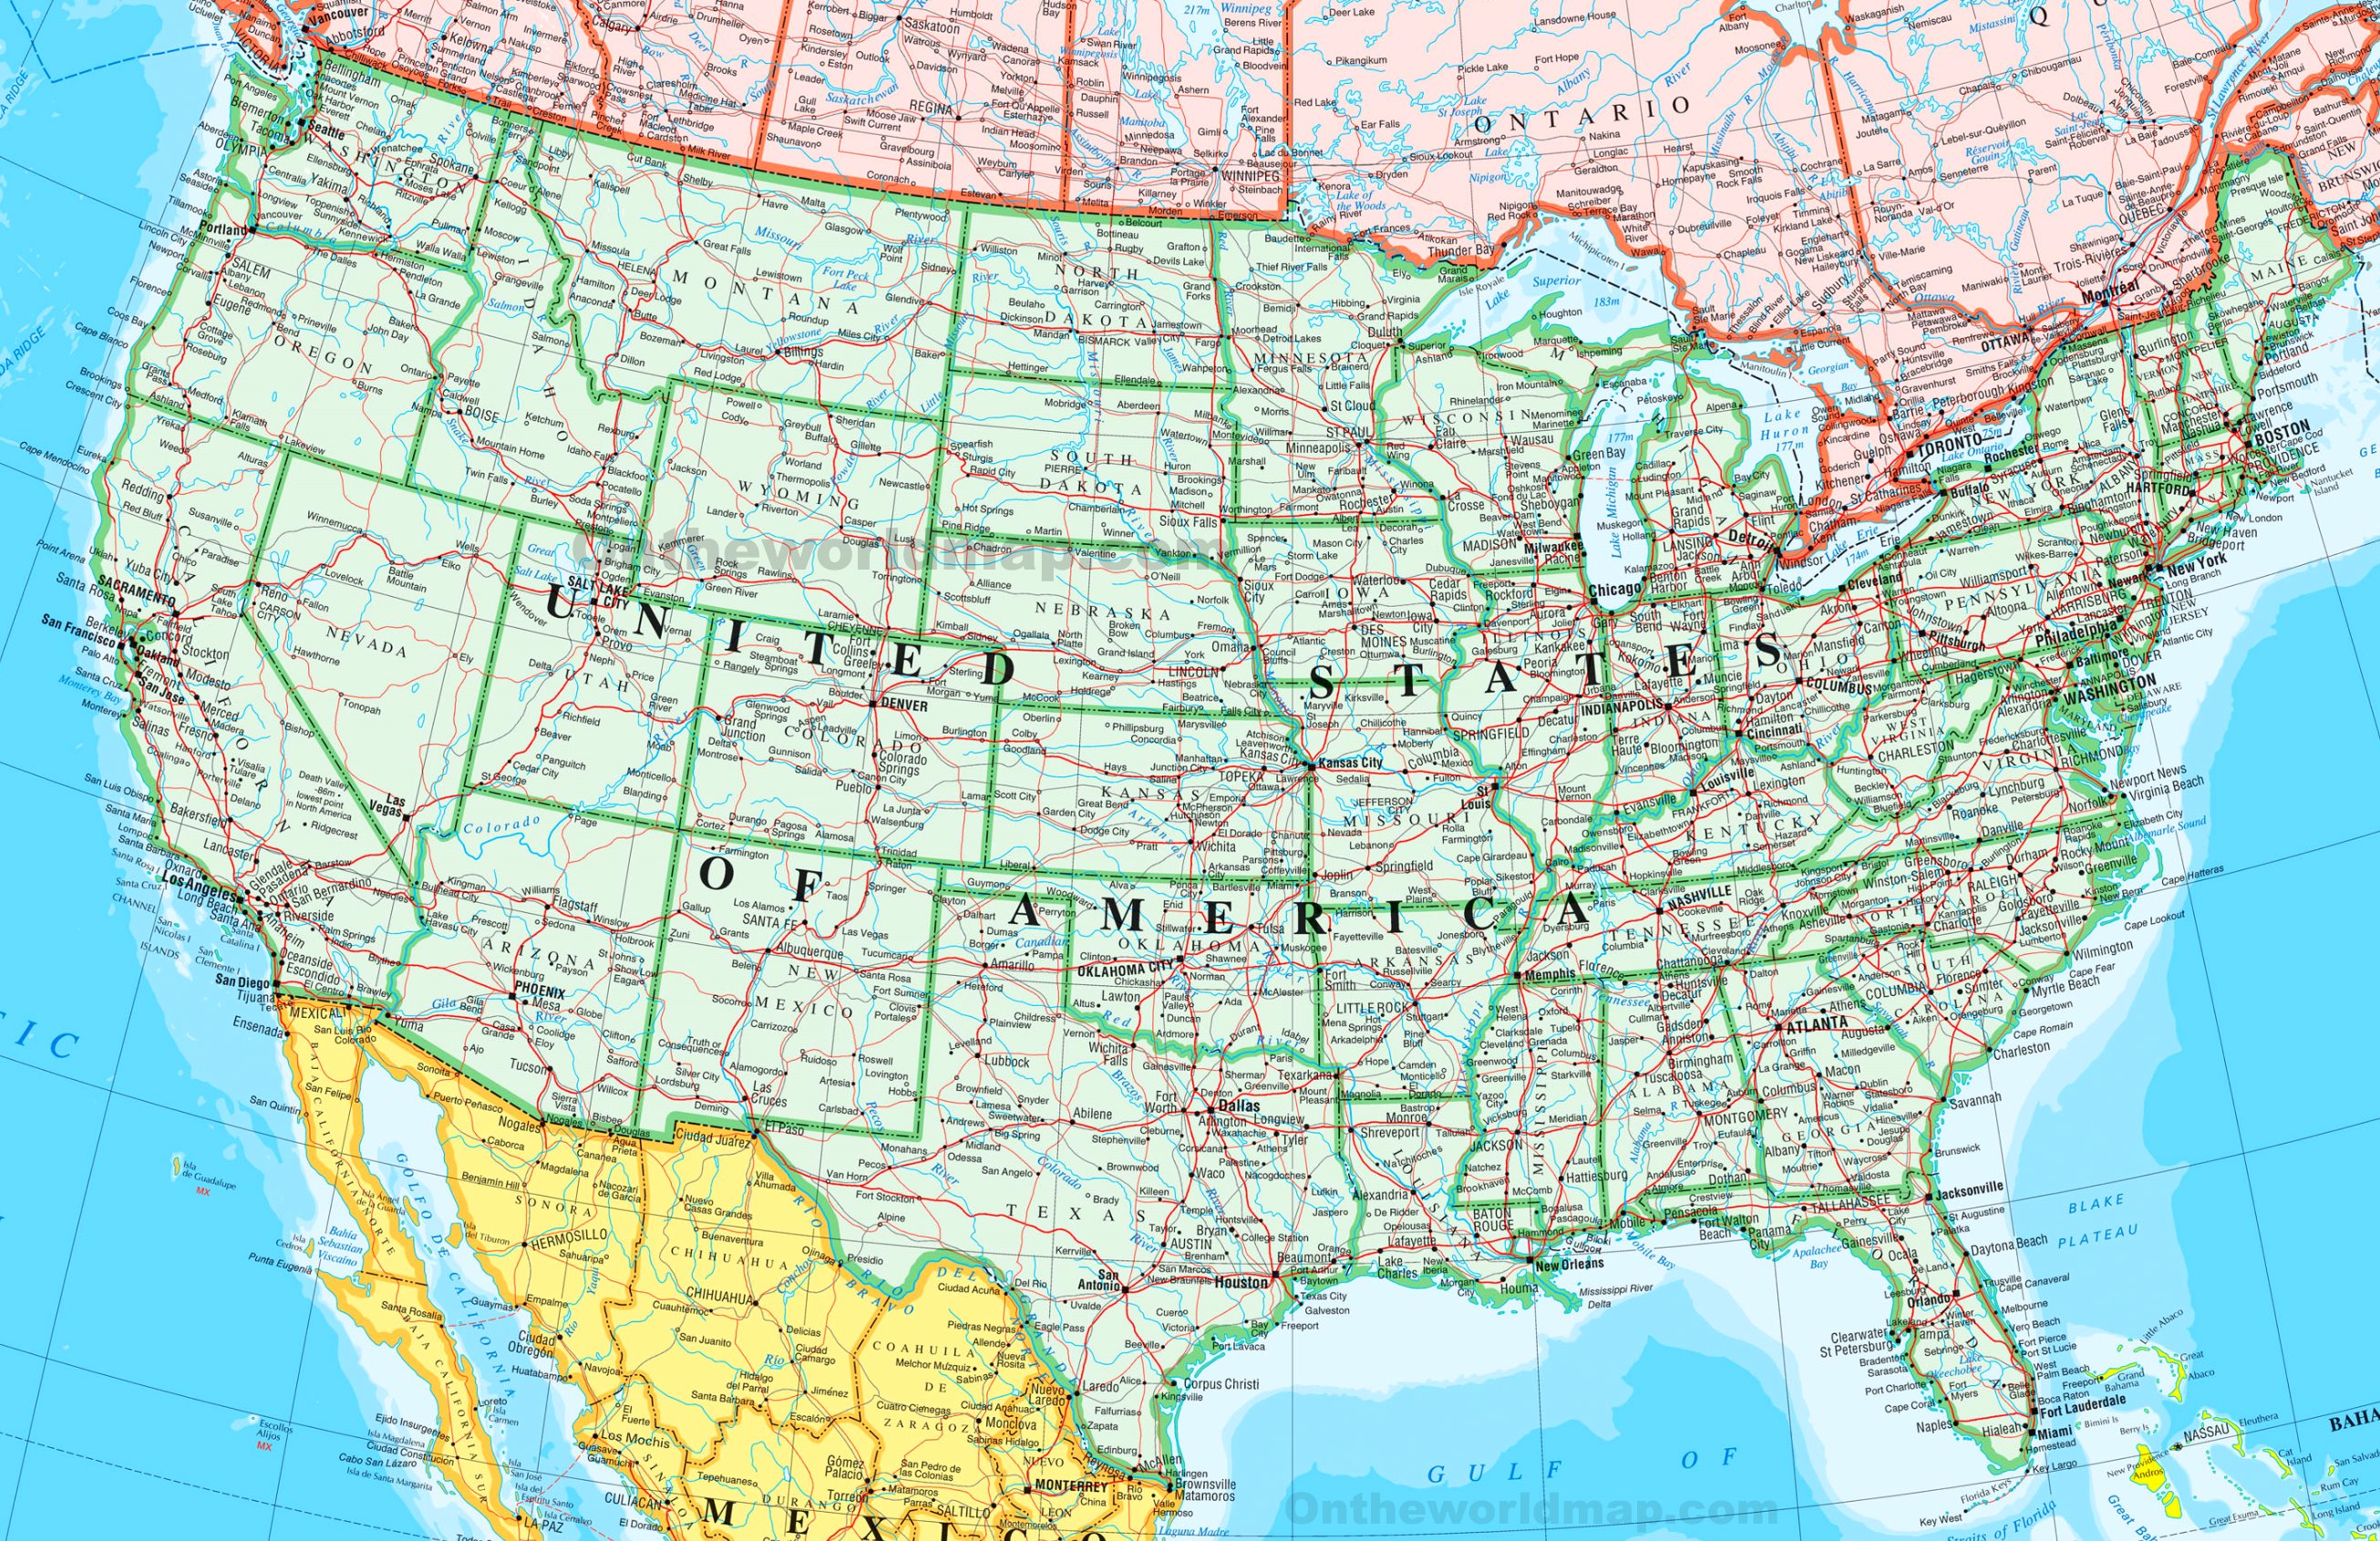 United States Of America Map Cities